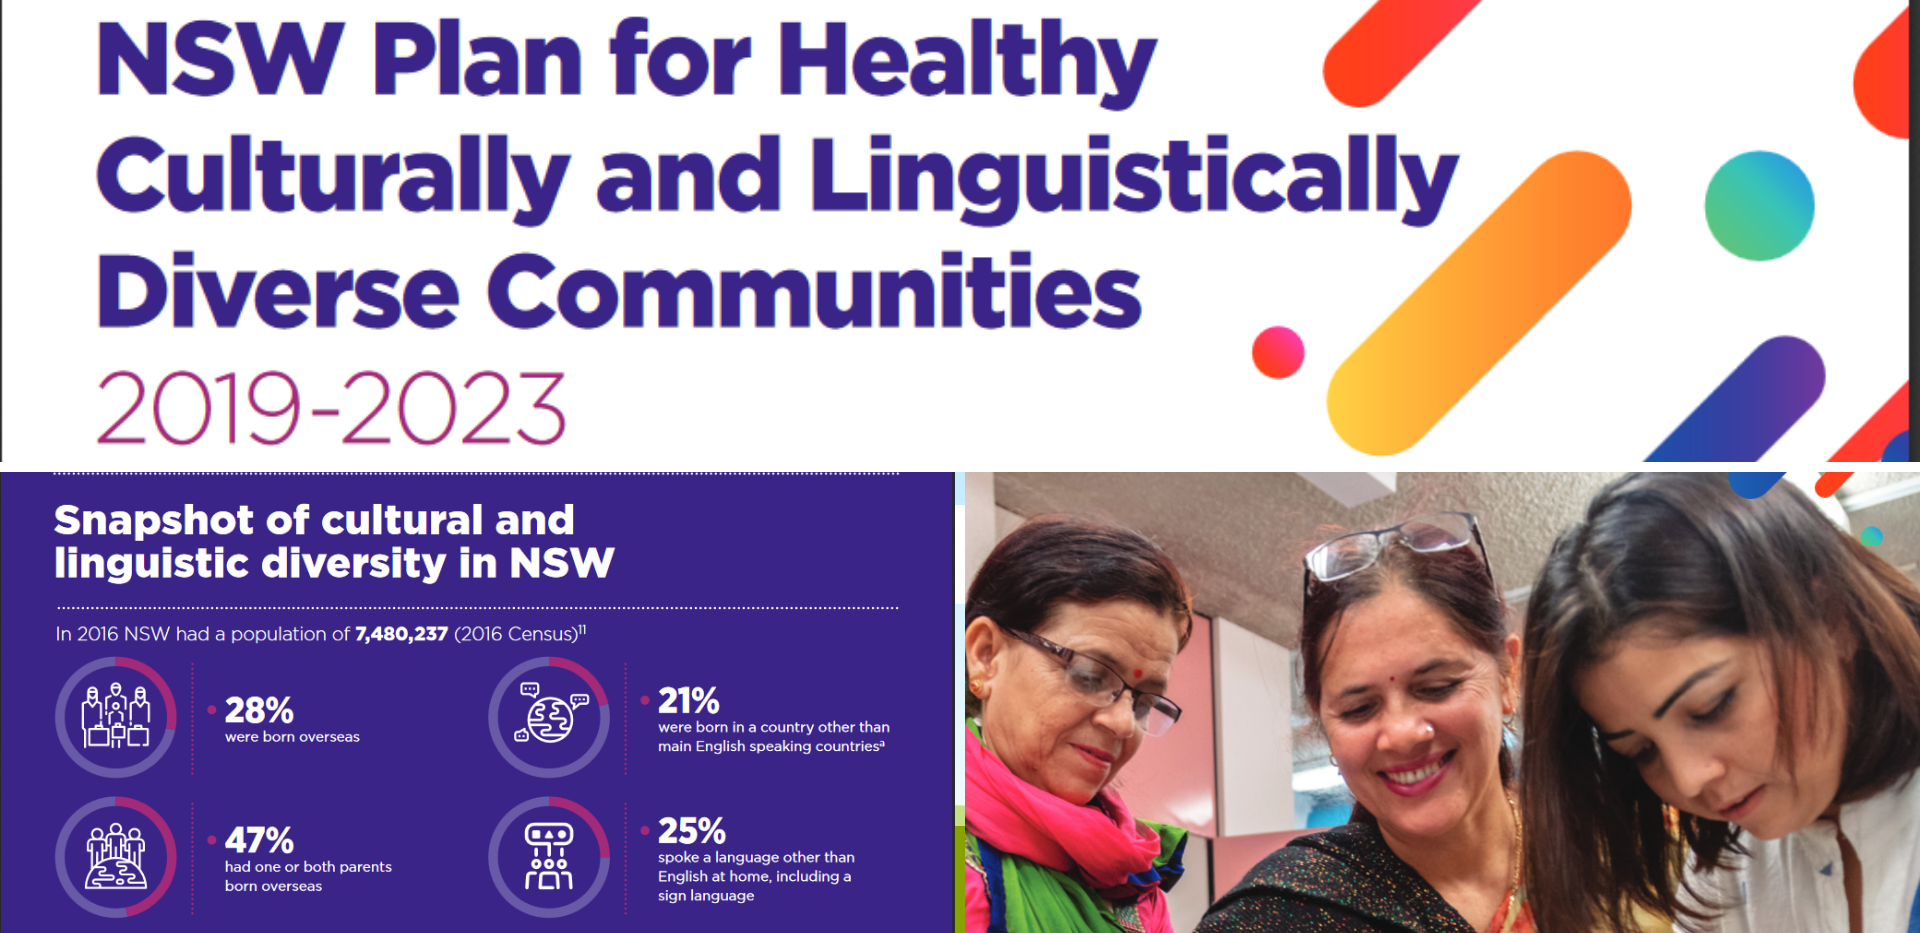 New multicultural health plan welcomed